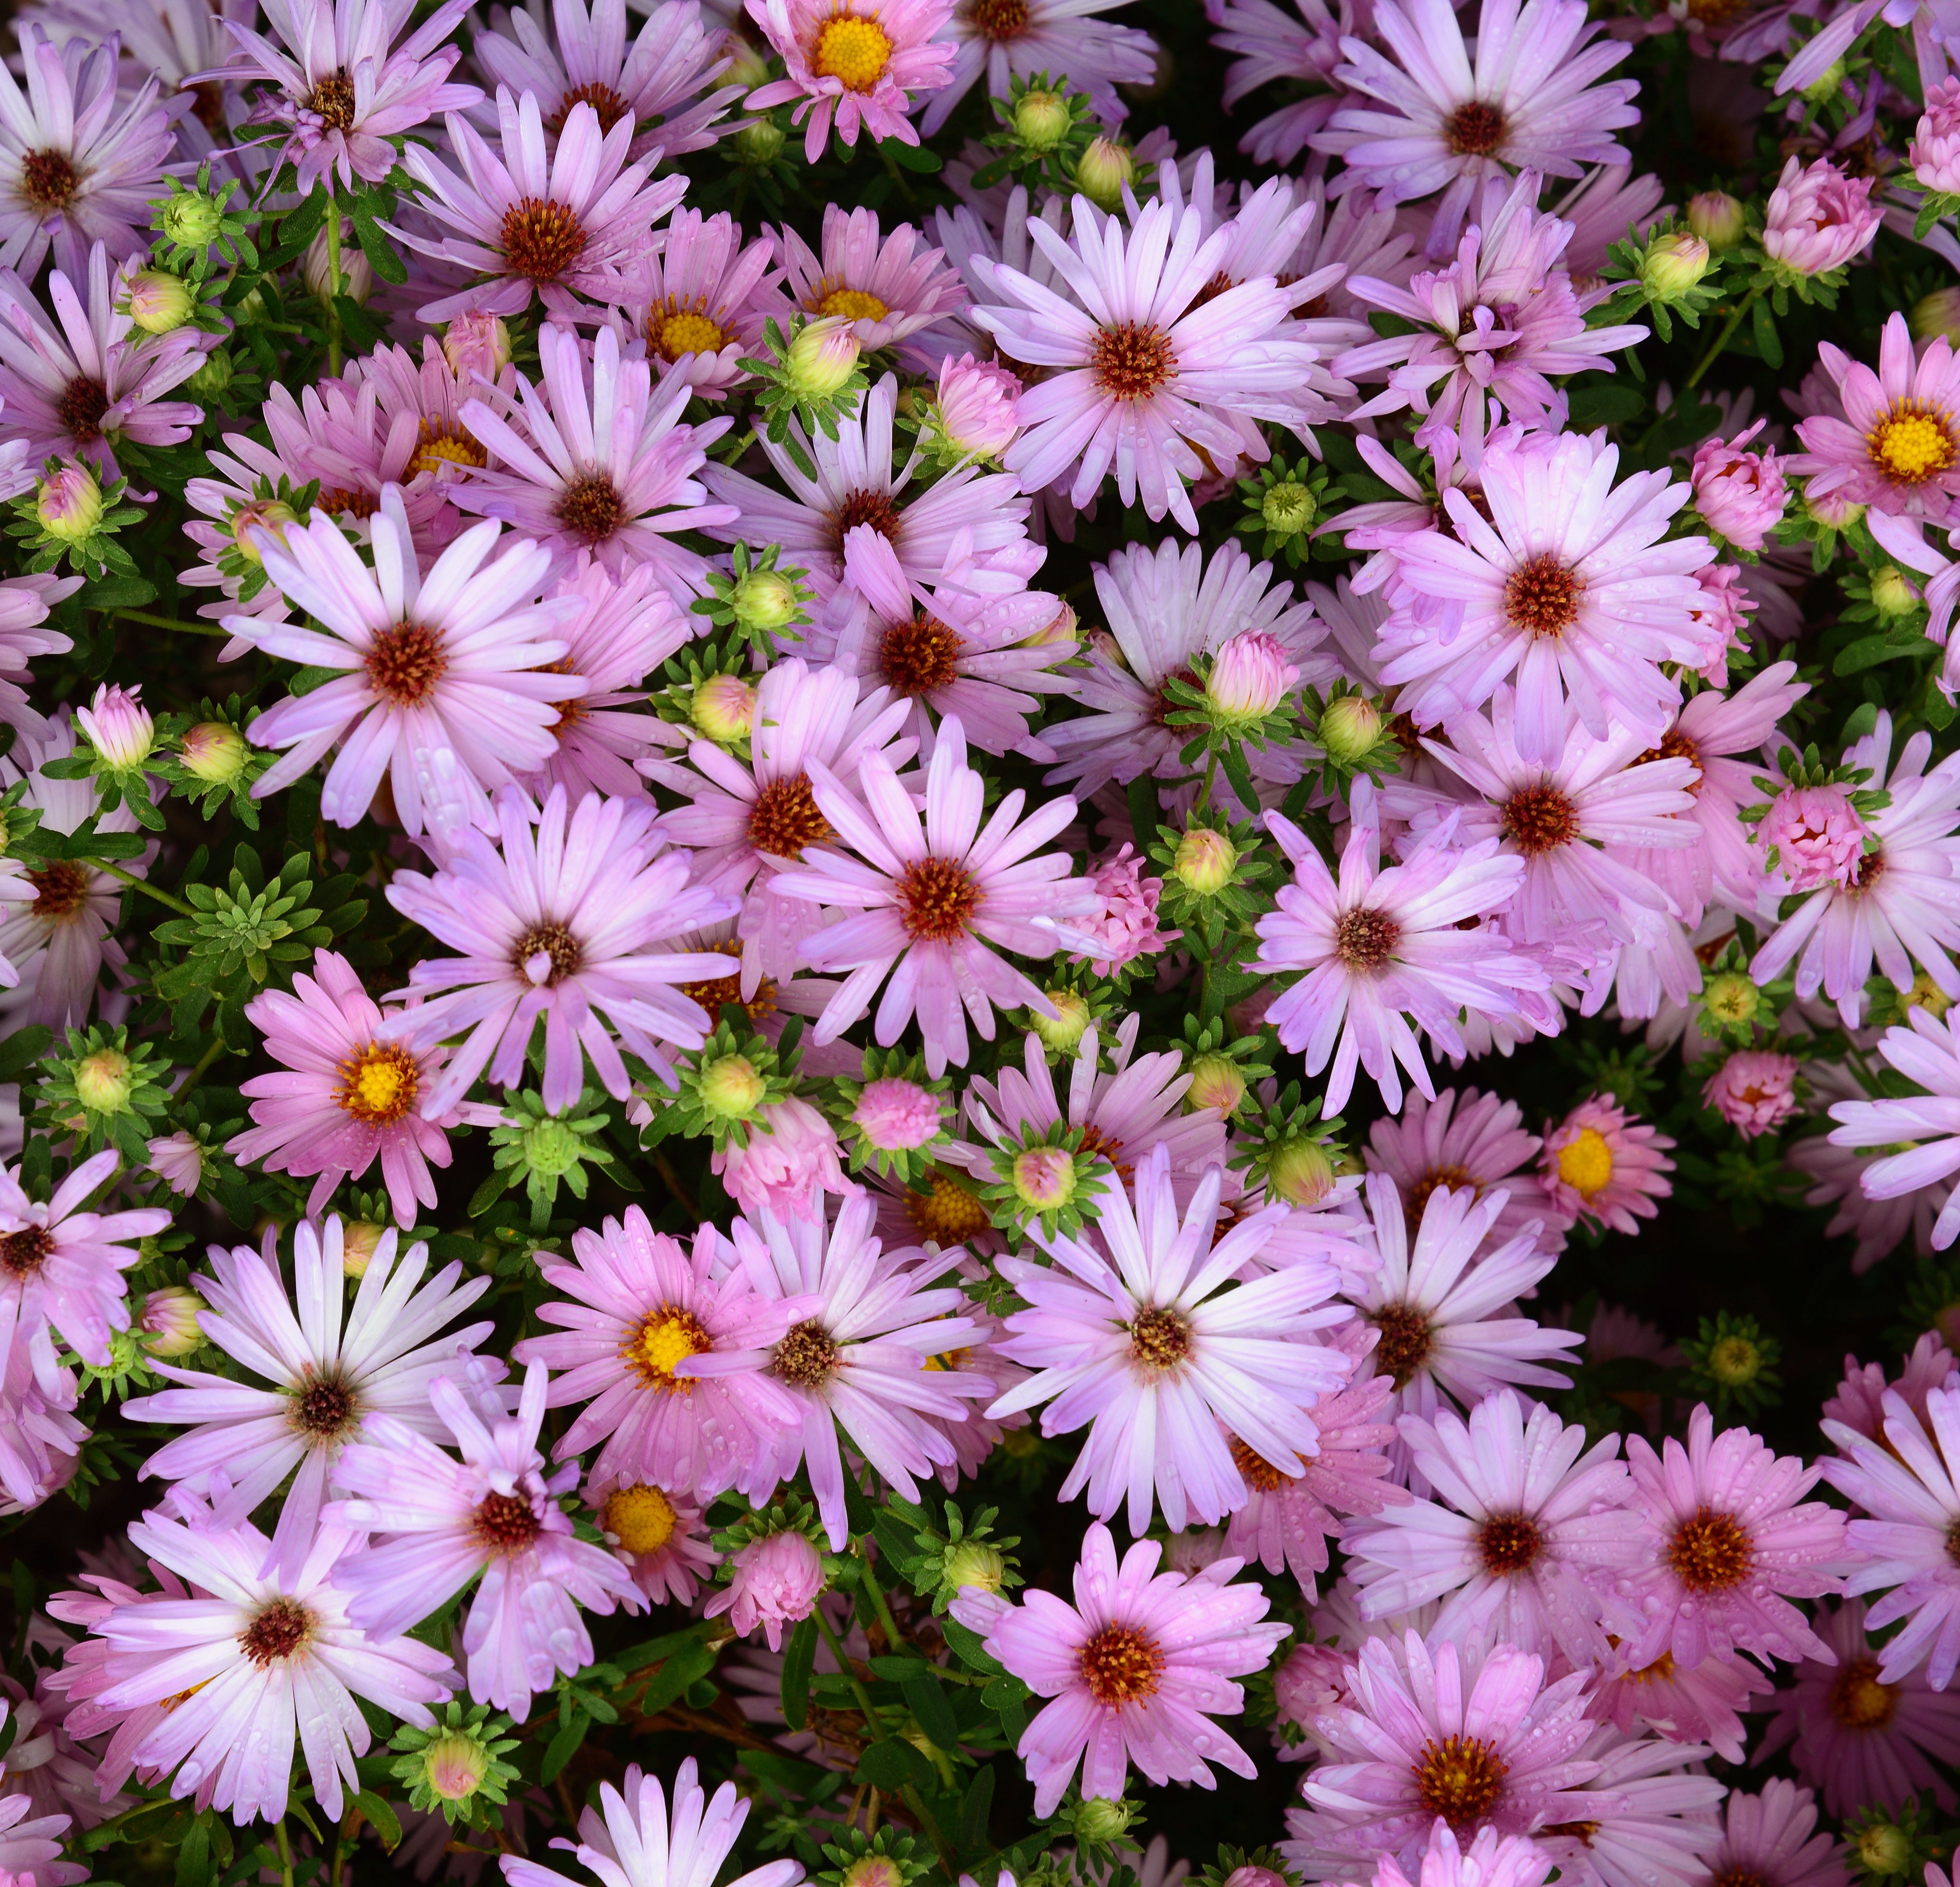 images/plants/aster/ast-billowing-pink/ast-billowing-pink-0002.jpg